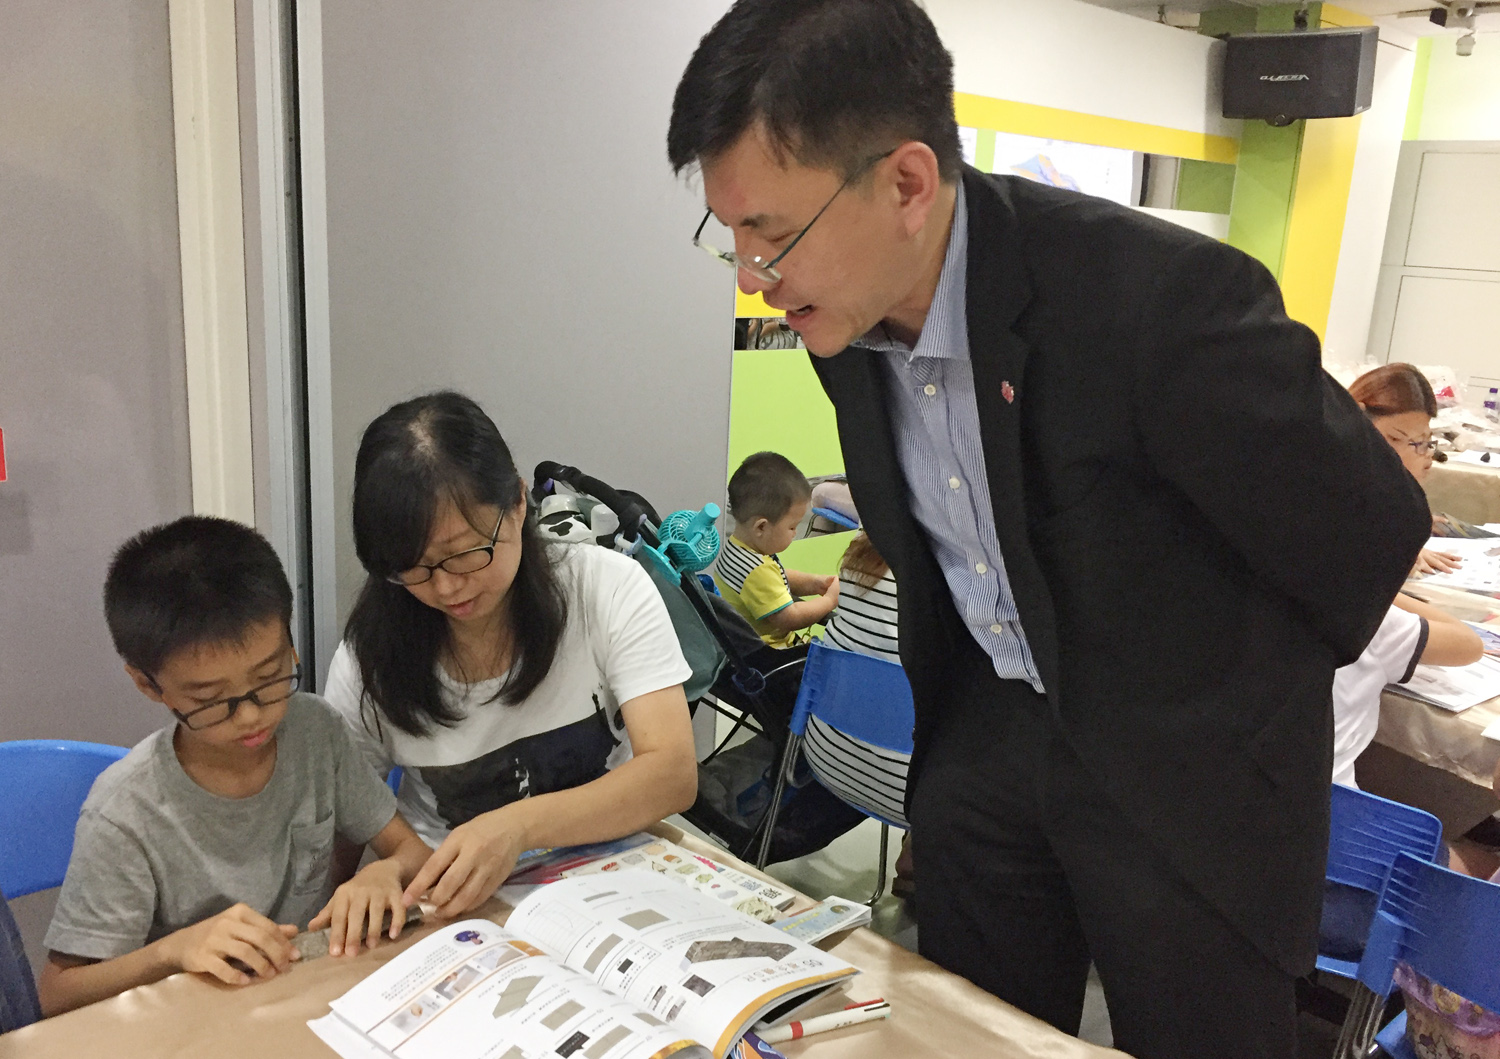 Mr Wilfred Leung, Development Director of The Salvation Army (right) shares paper airplanes origami skills with participants.